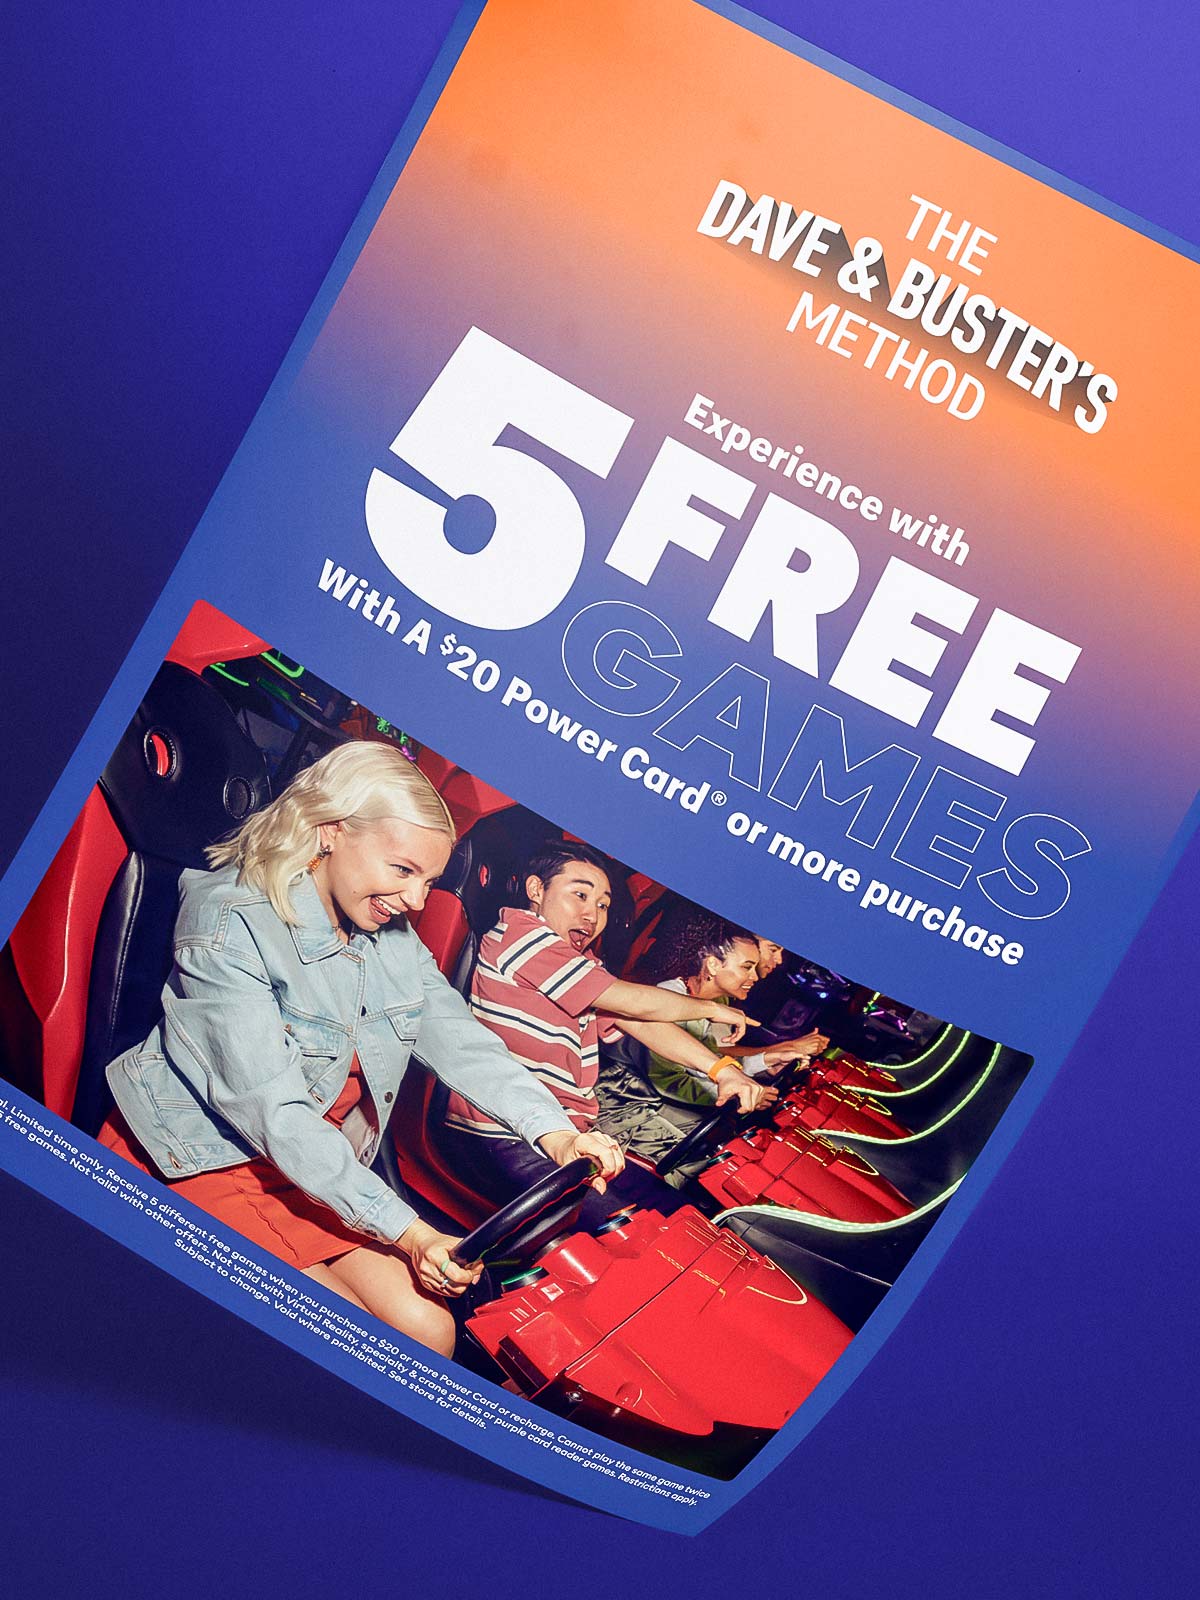 Dave & Buster's Summer Campaign